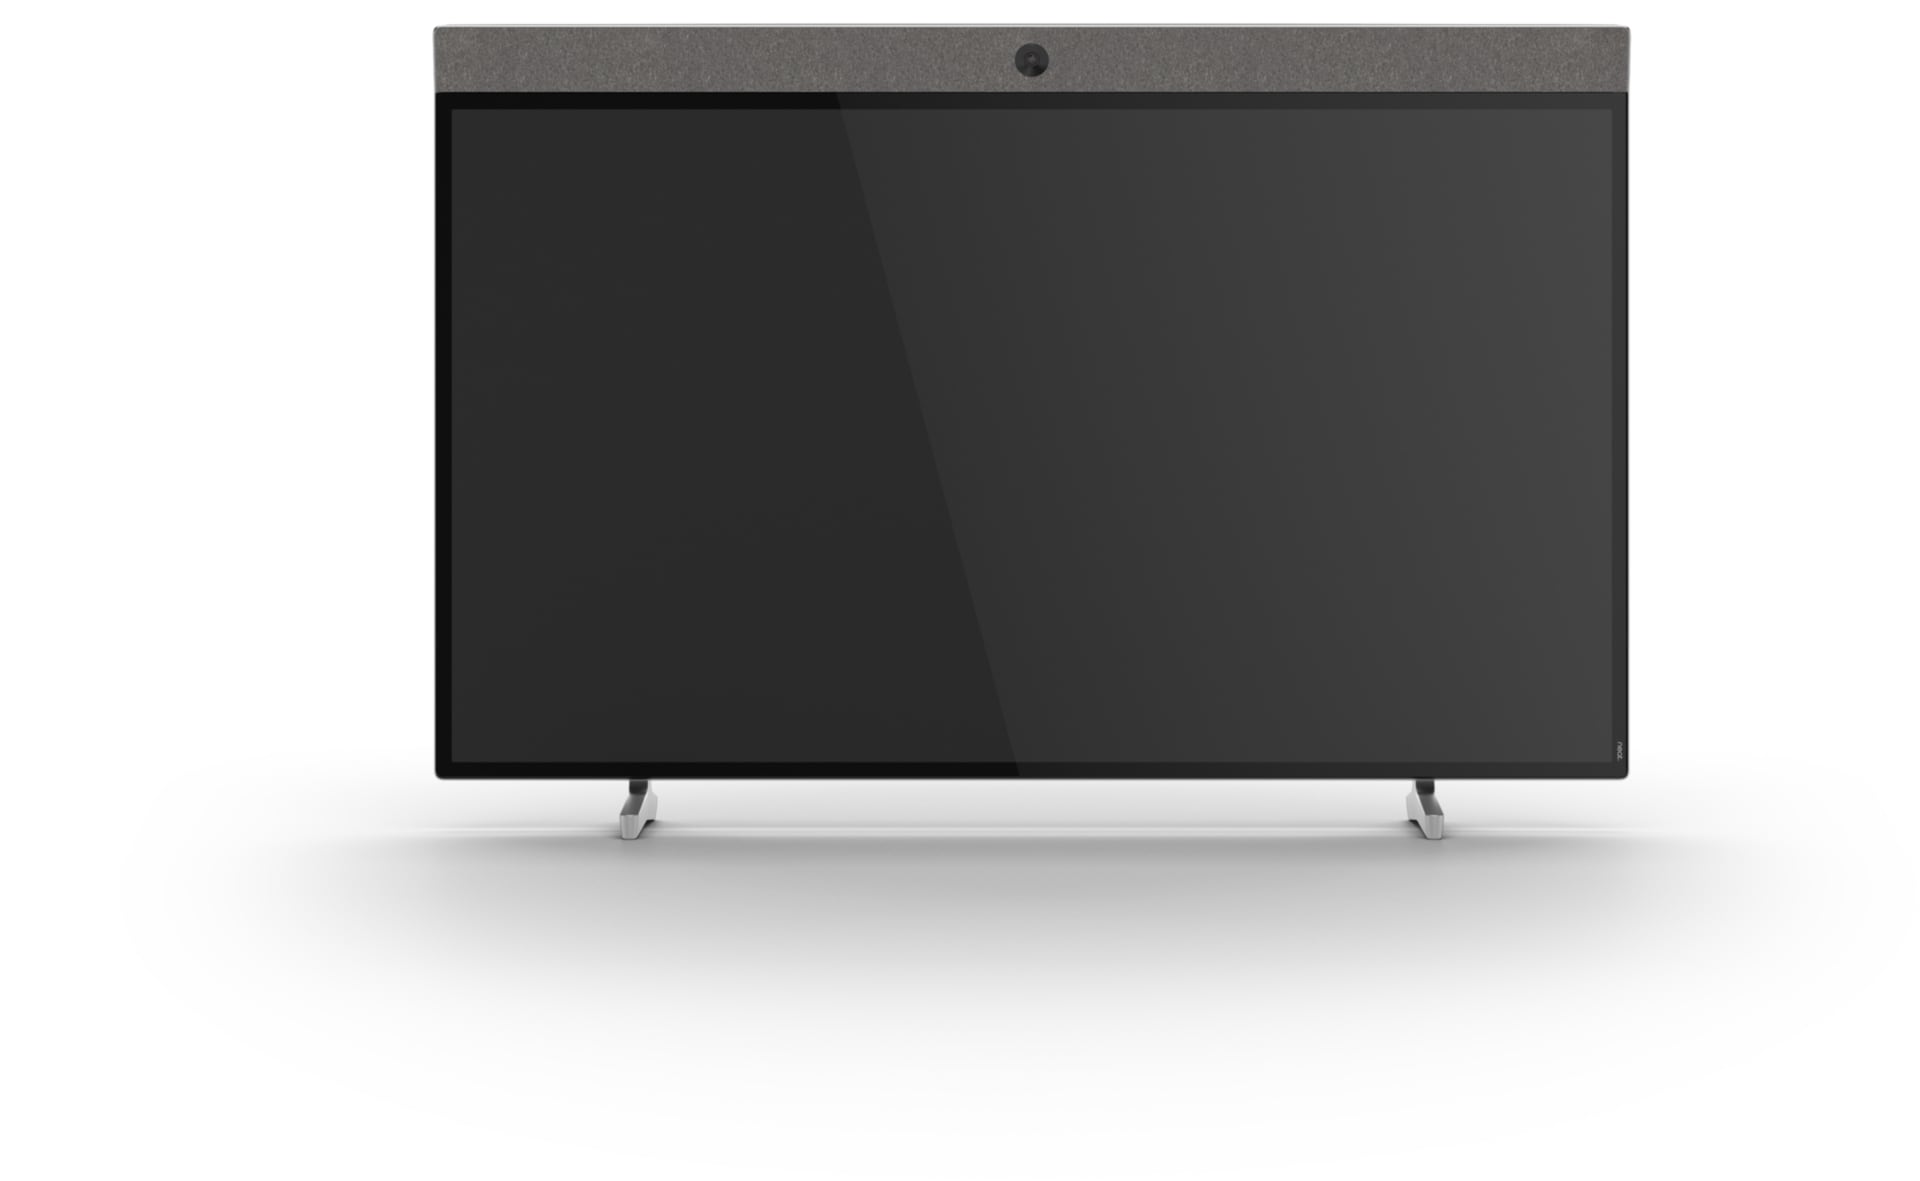 Neat Board 65" - video conferencing device